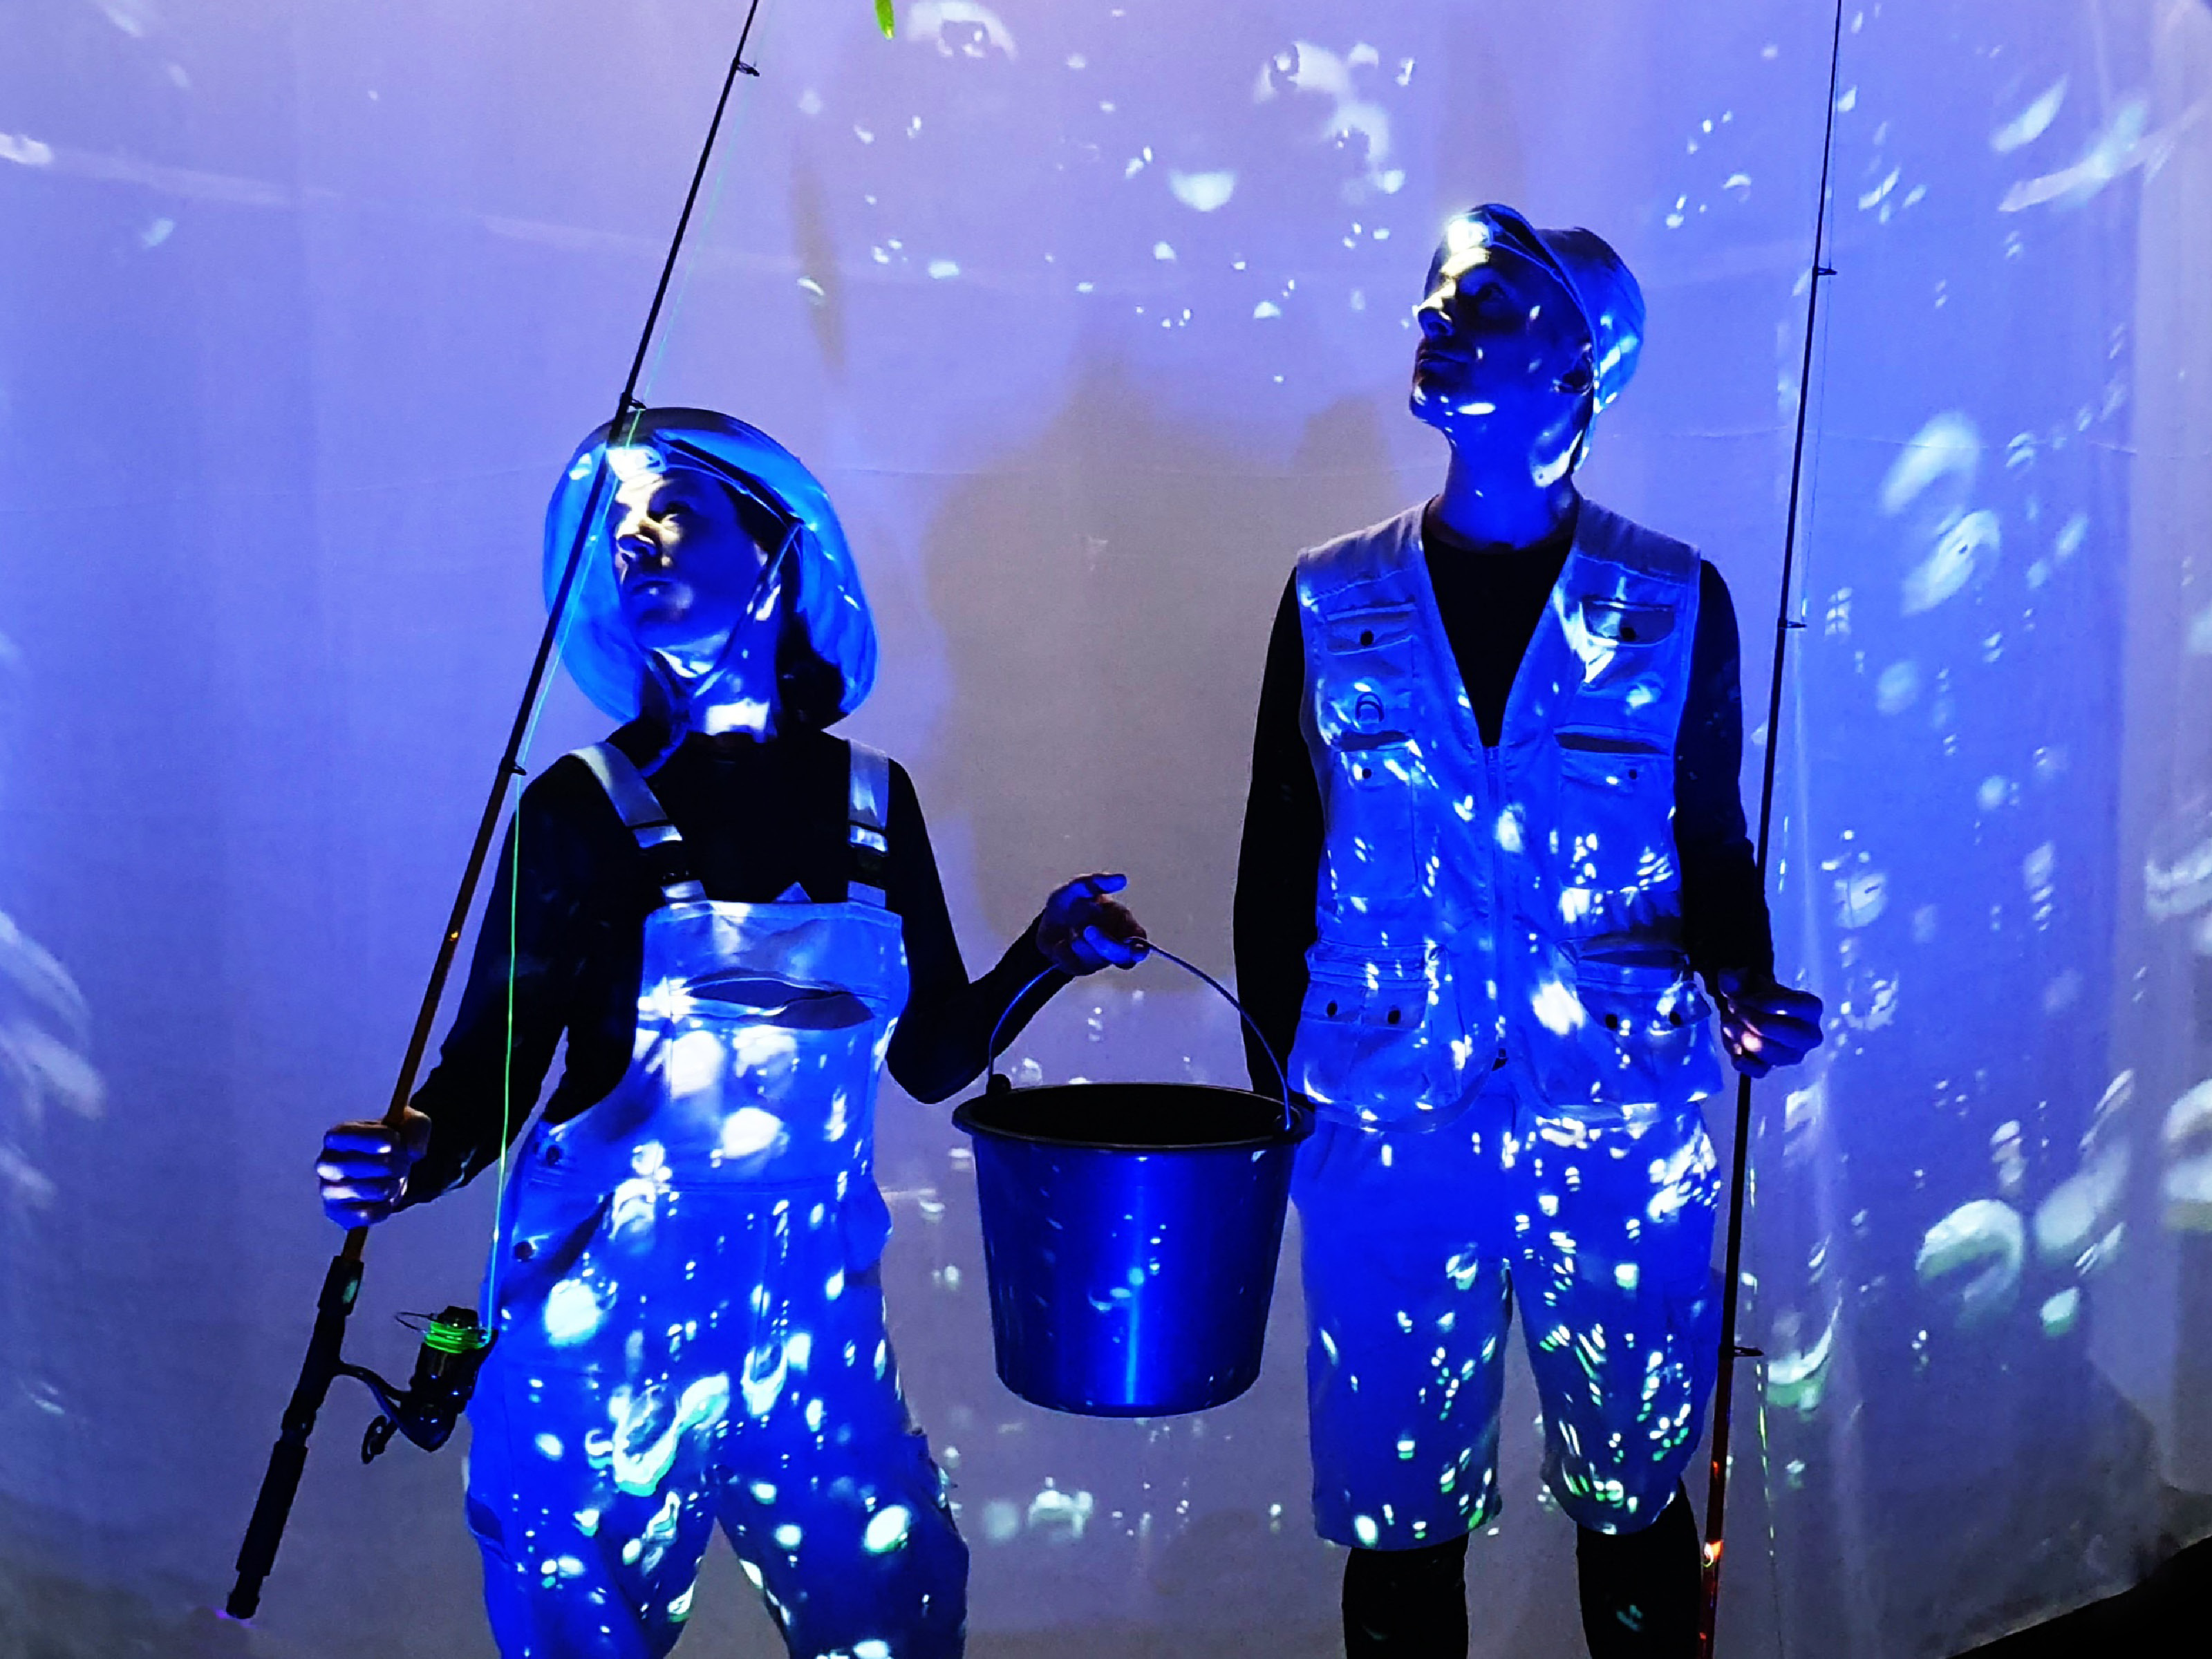 Two people in fishing outfits stand in front of a blue lit screen with bubbles and hold two fishing rods and a metal bucket in their hands.